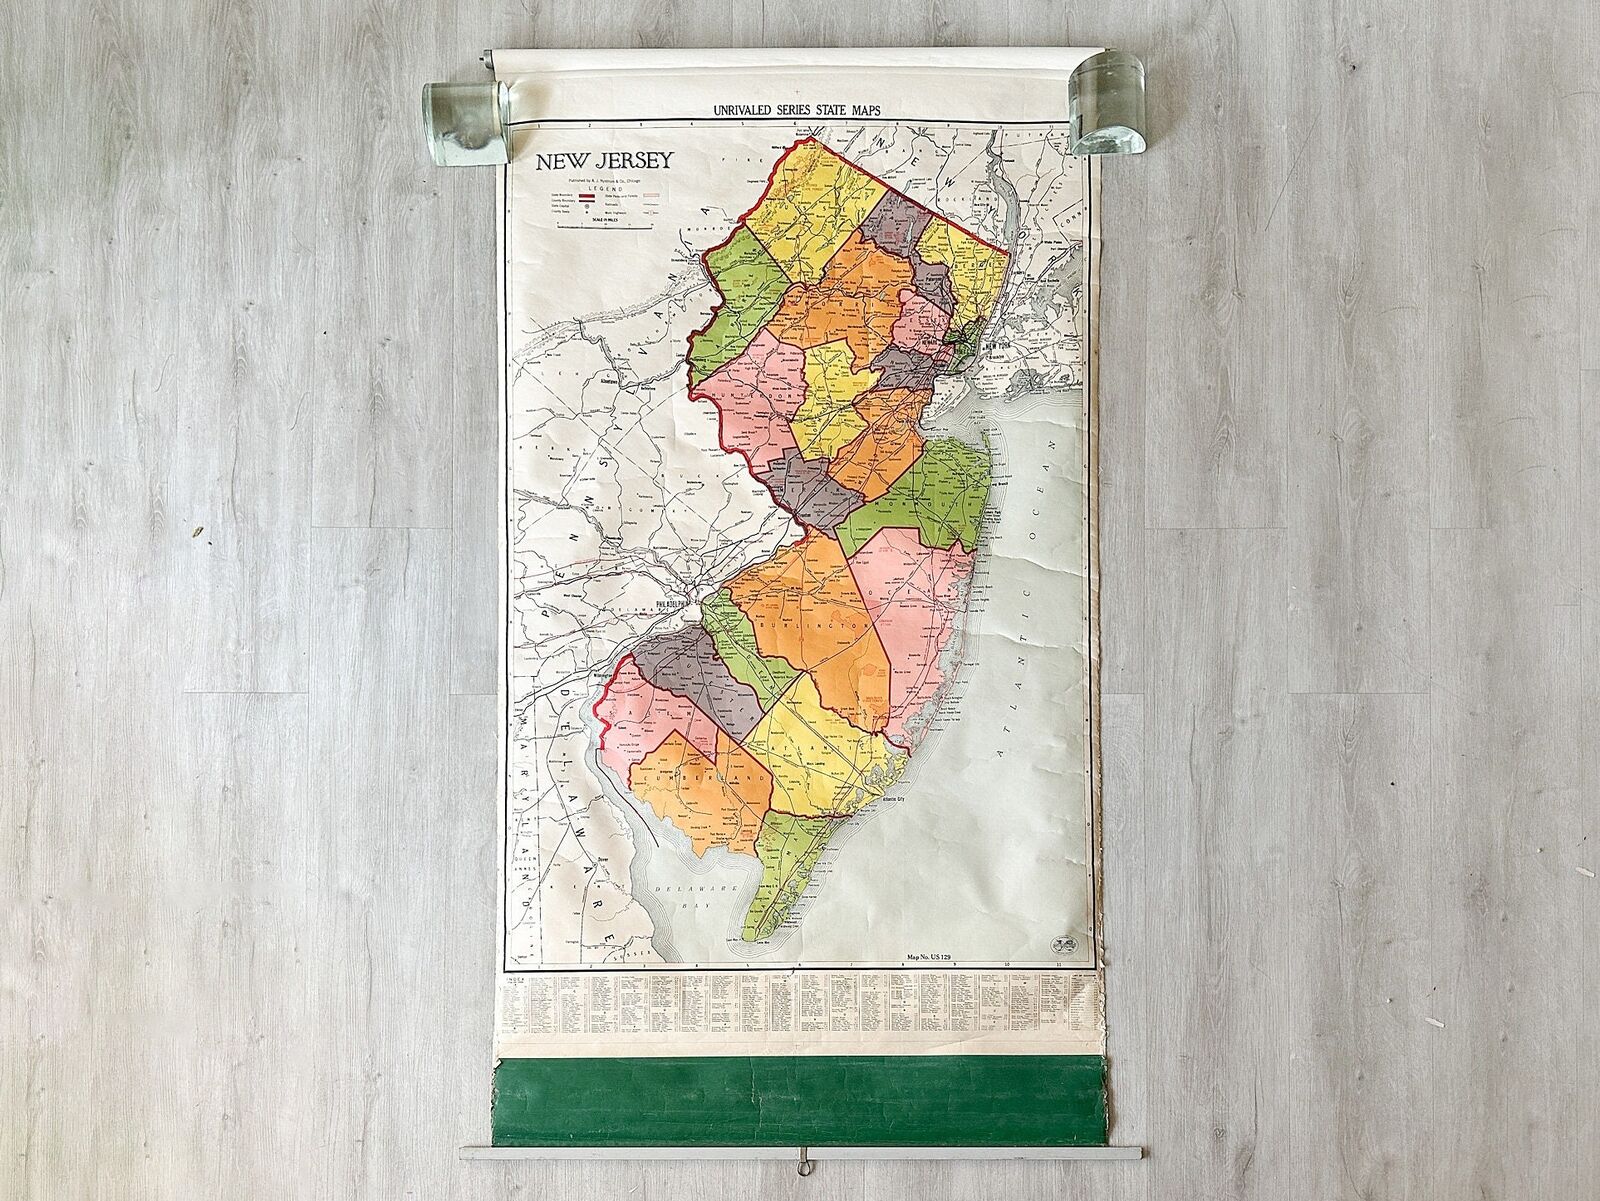 1950s Rare Large Pull Down Map of New Jersey by A.J. Nystrom Unrivaled Series S